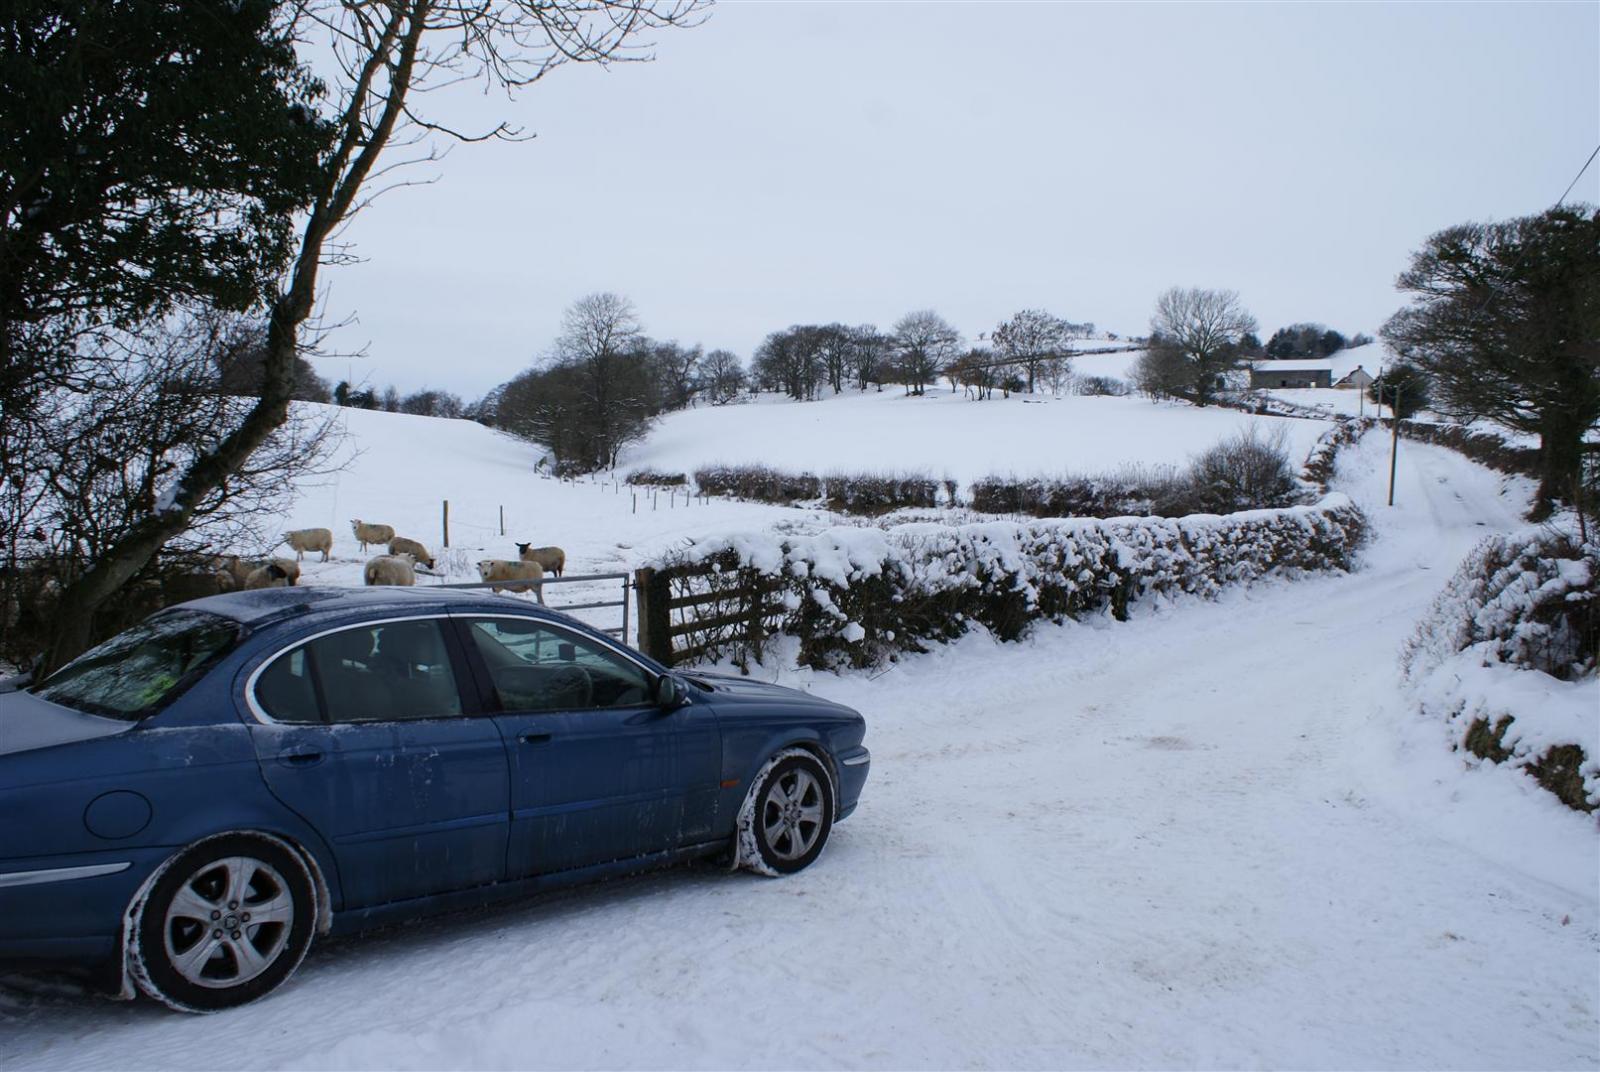 there wasn't any road where the X-type would struggle. This car is got a really good handling on the snow!